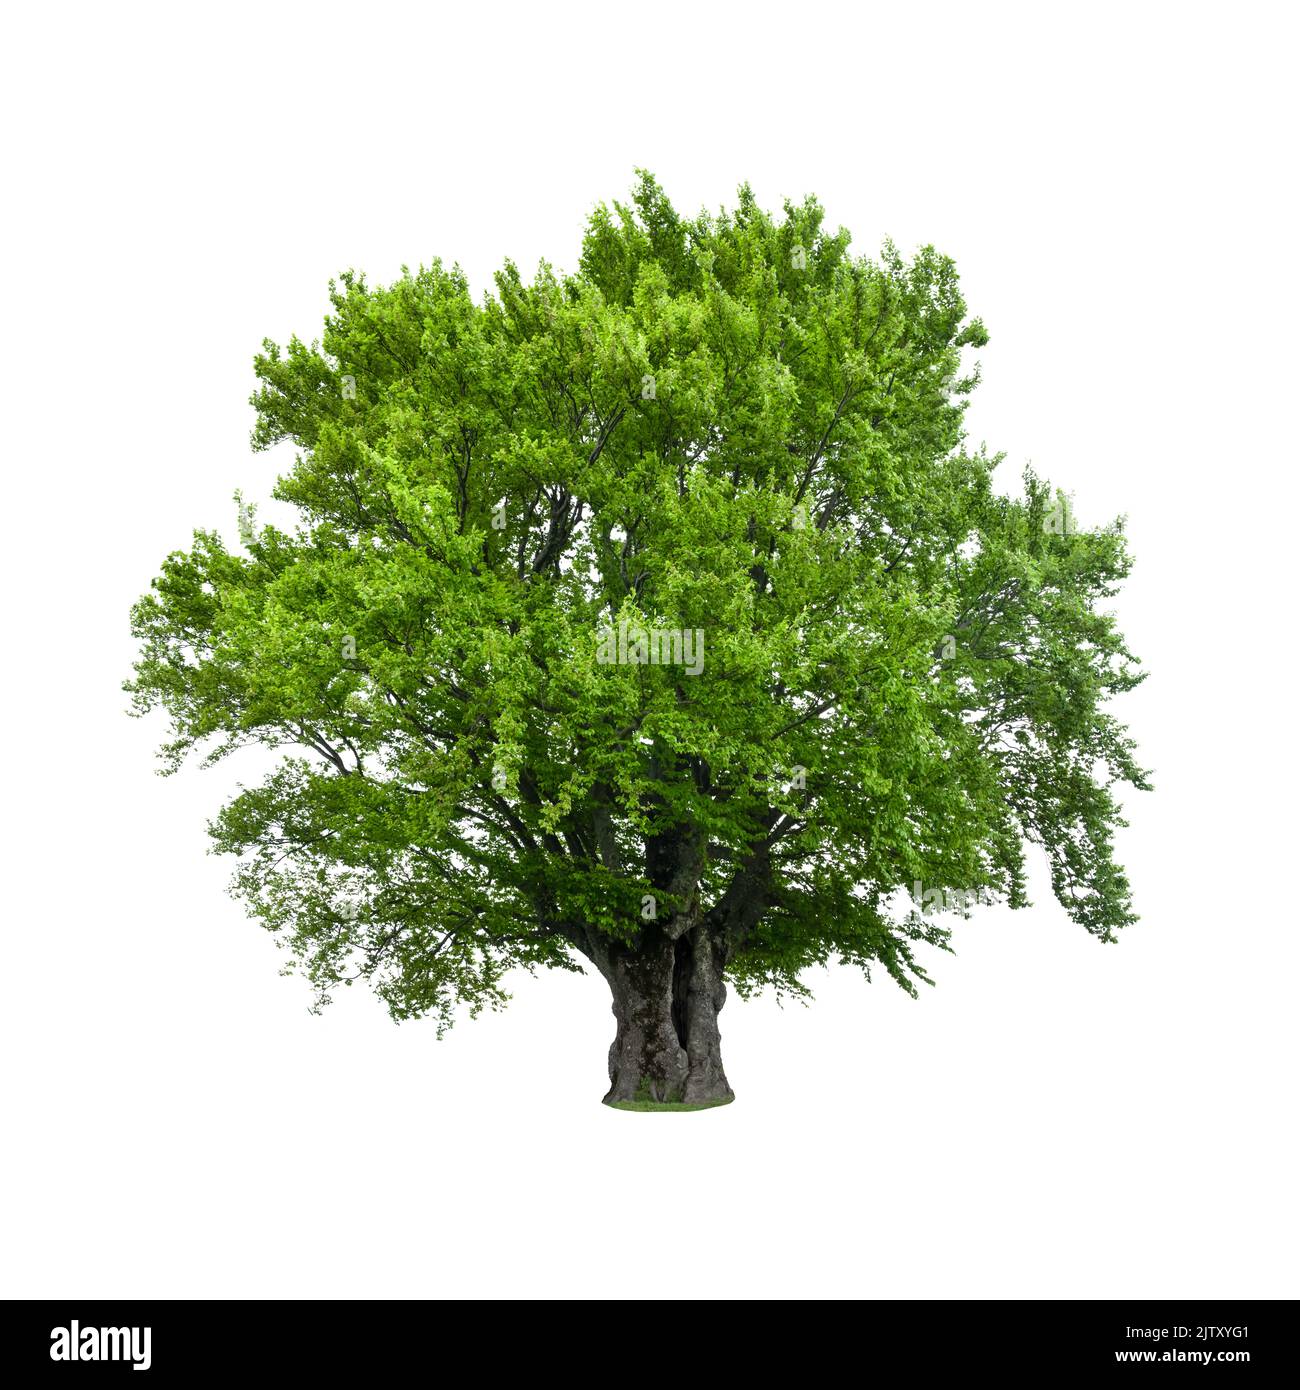 Green tree isolated on white background. Large old beech tree with lush green leaves Stock Photo